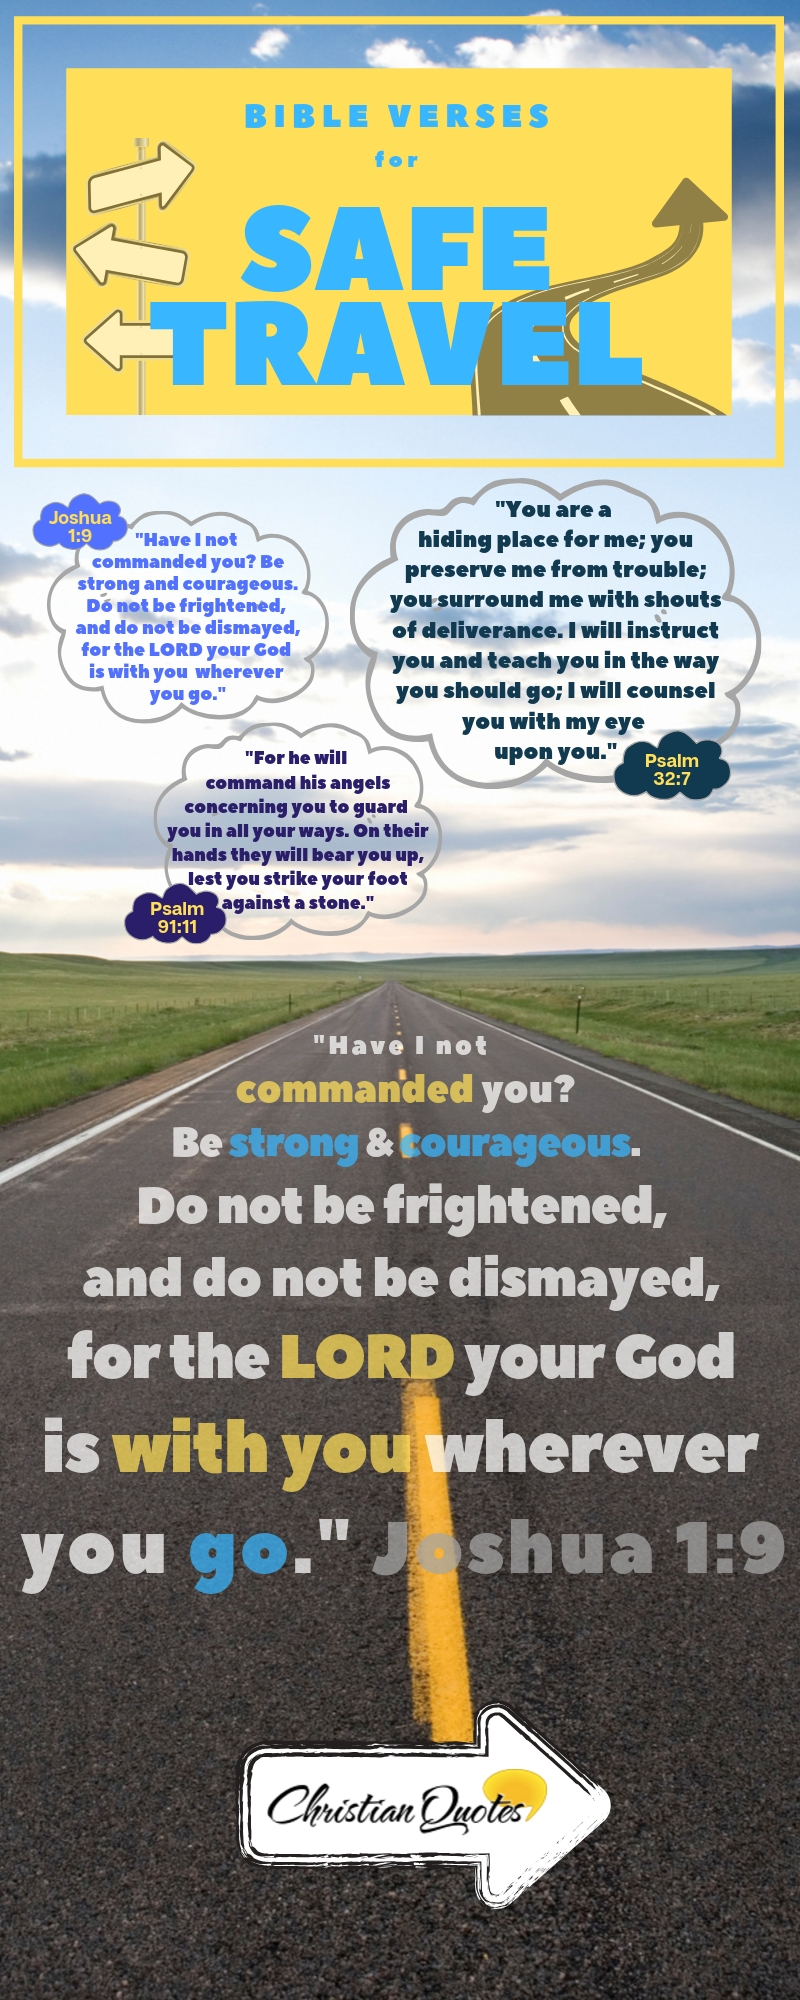 safe travel quotes bible